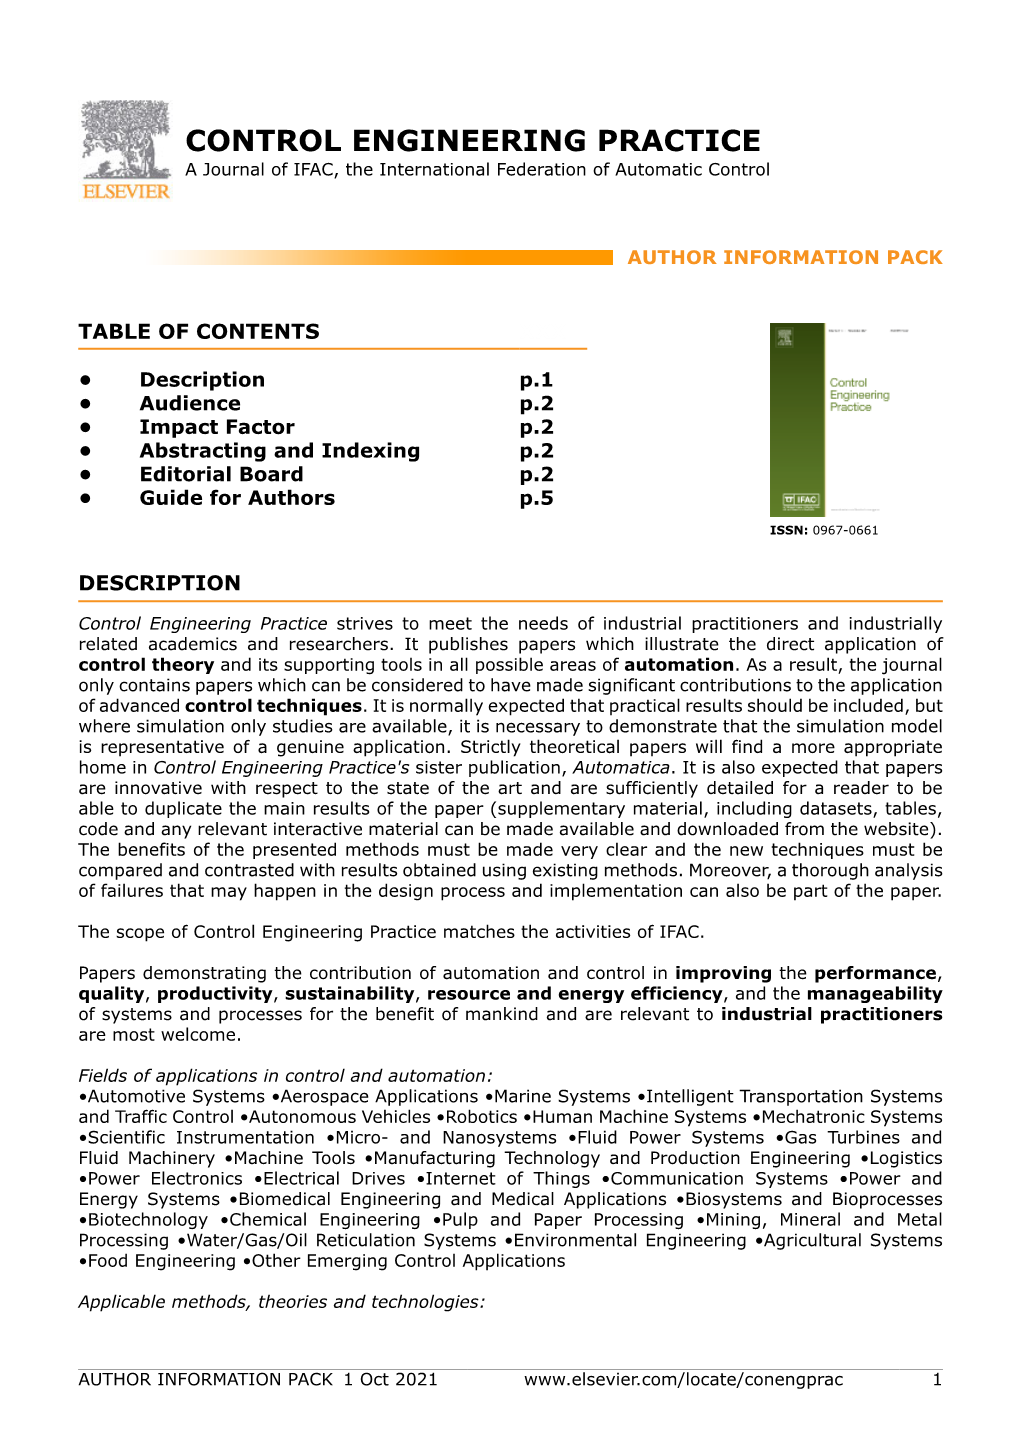 CONTROL ENGINEERING PRACTICE a Journal of IFAC, the International Federation of Automatic Control